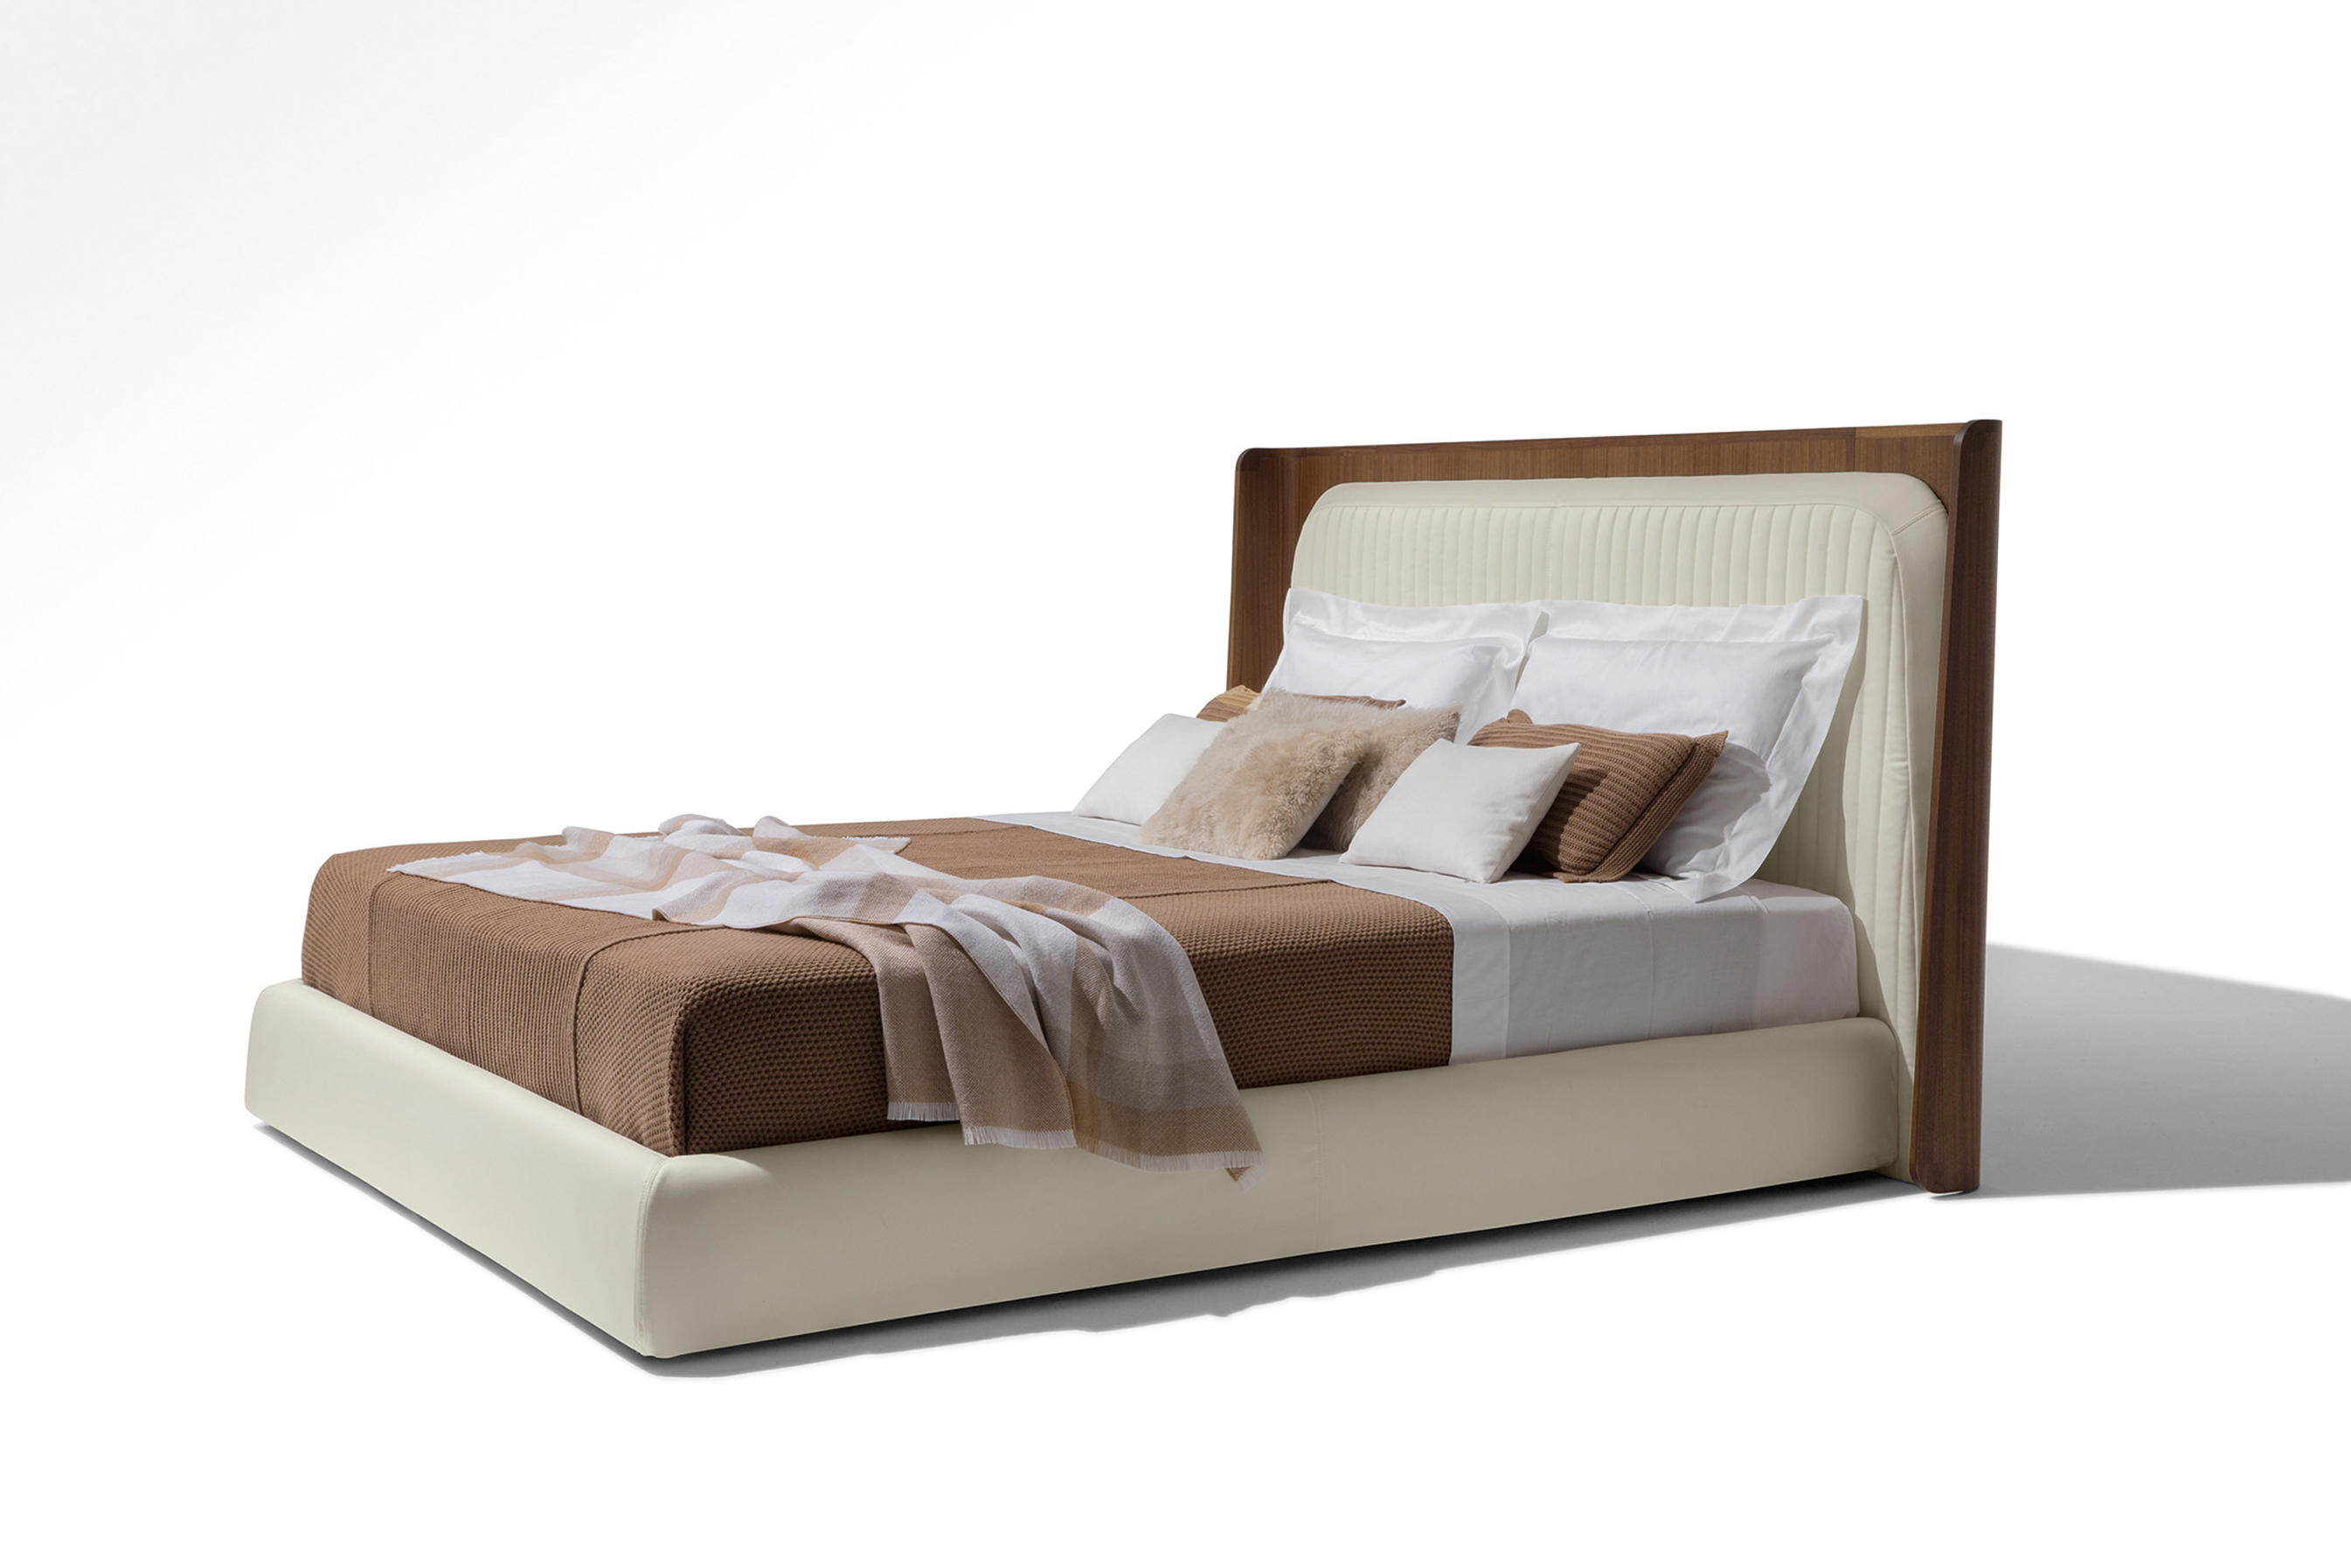 hypnos beds price